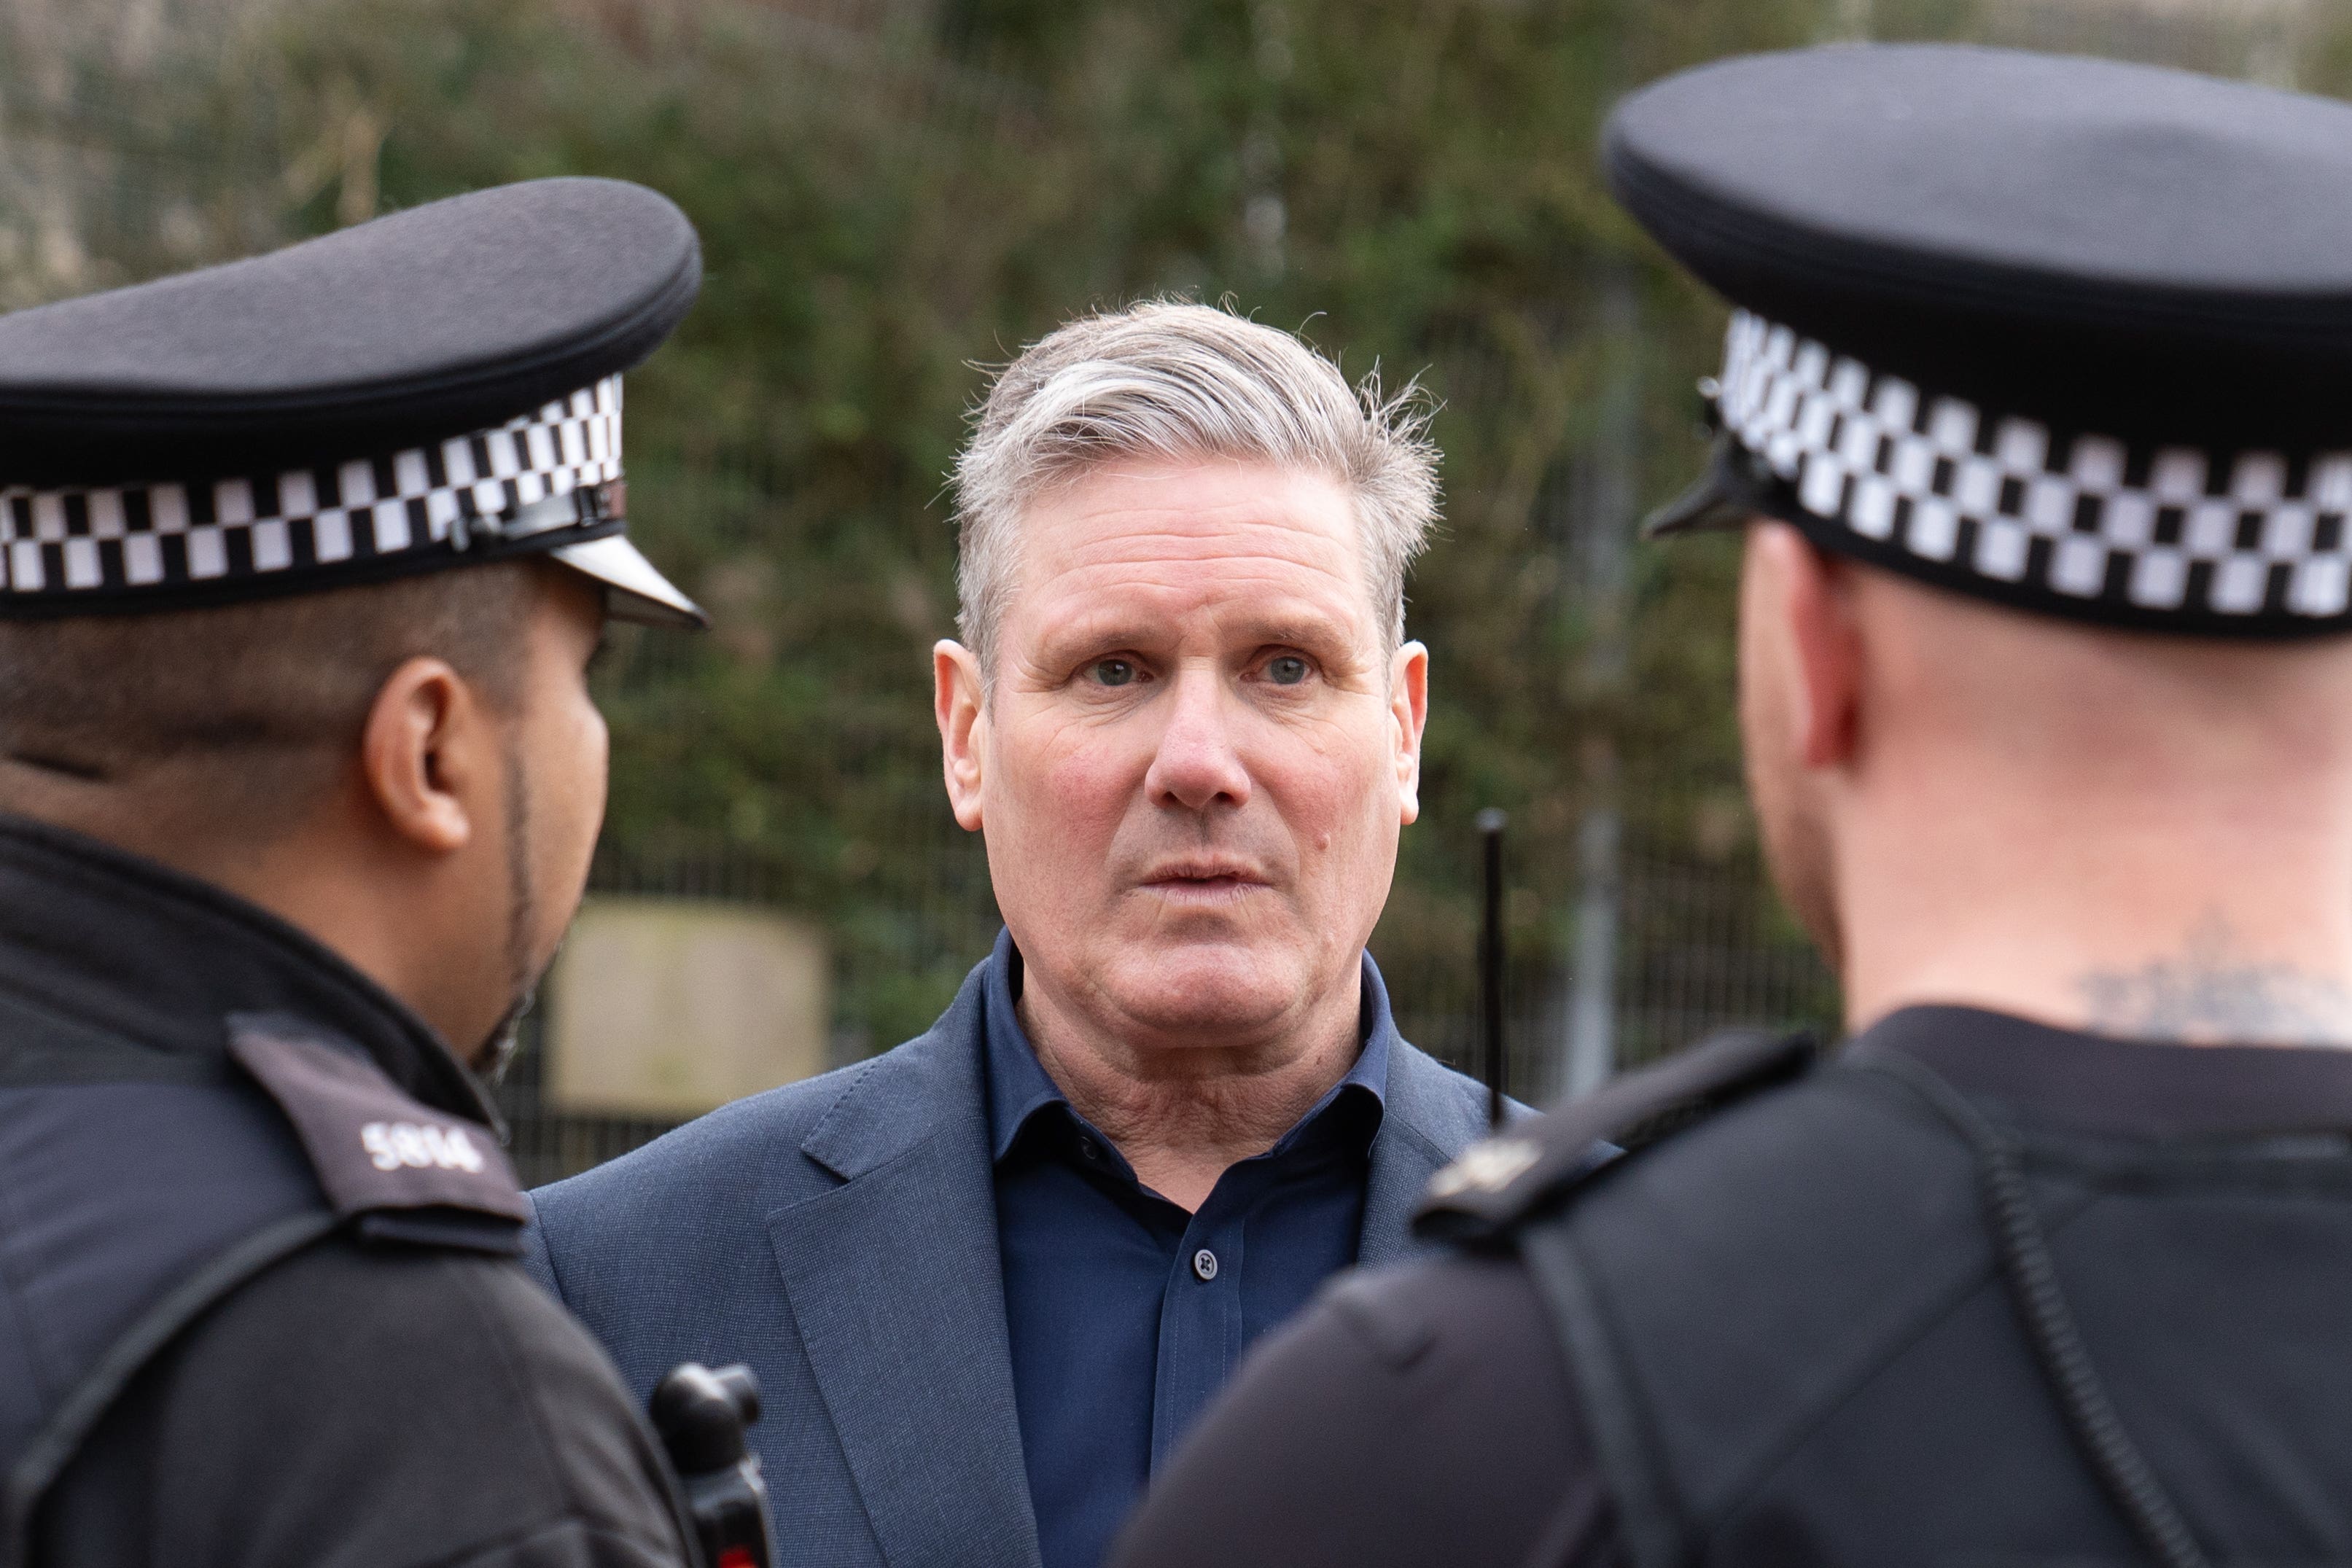 Labour leader Keir Starmer has pledged to tackle knife crime